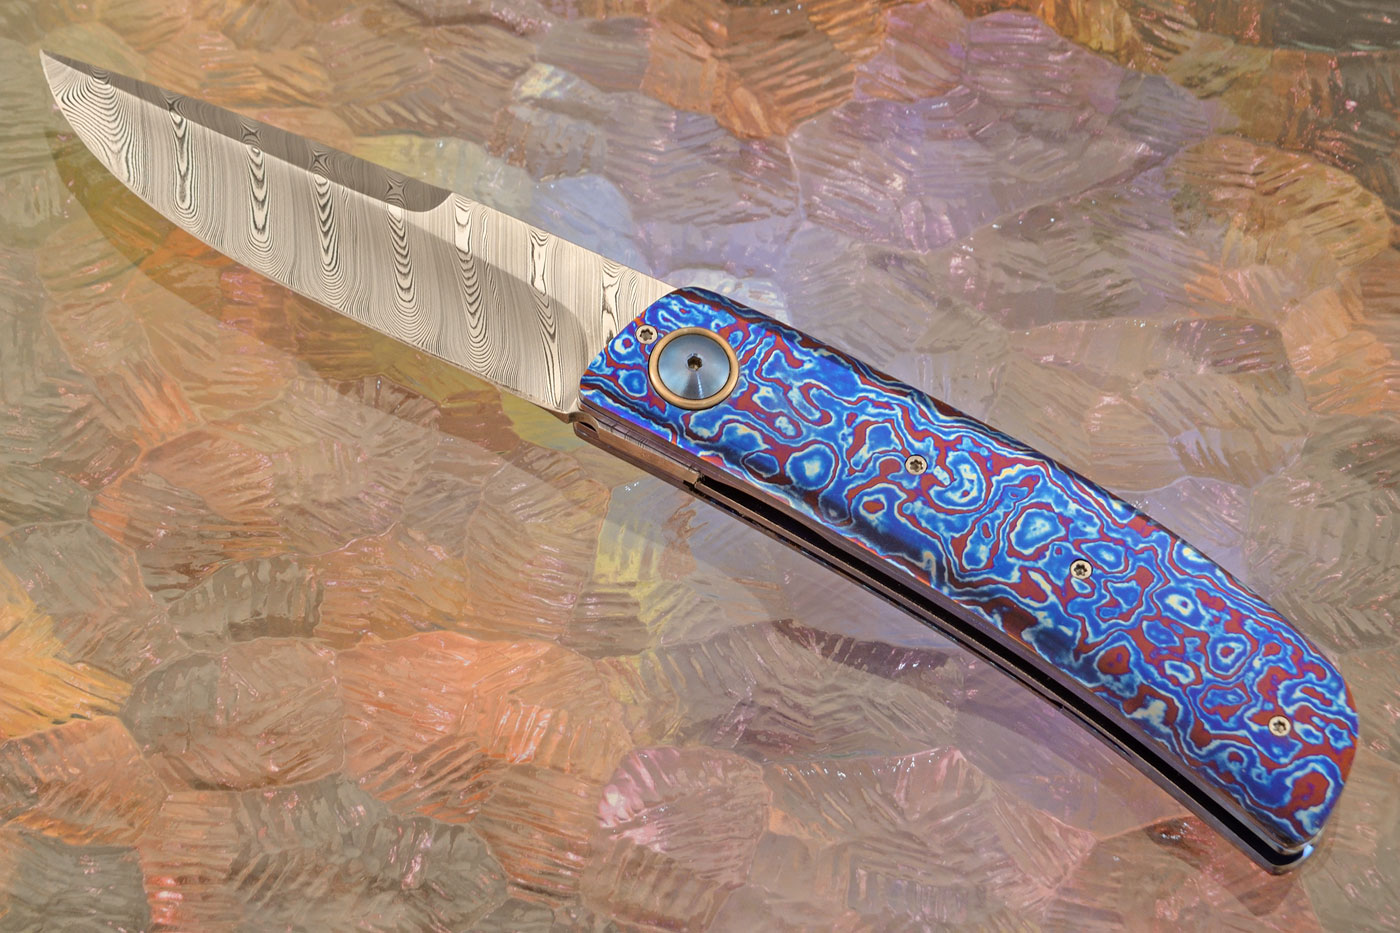 LL-S Front Flipper with Damasteel and Timascus (Ceramic IKBS)